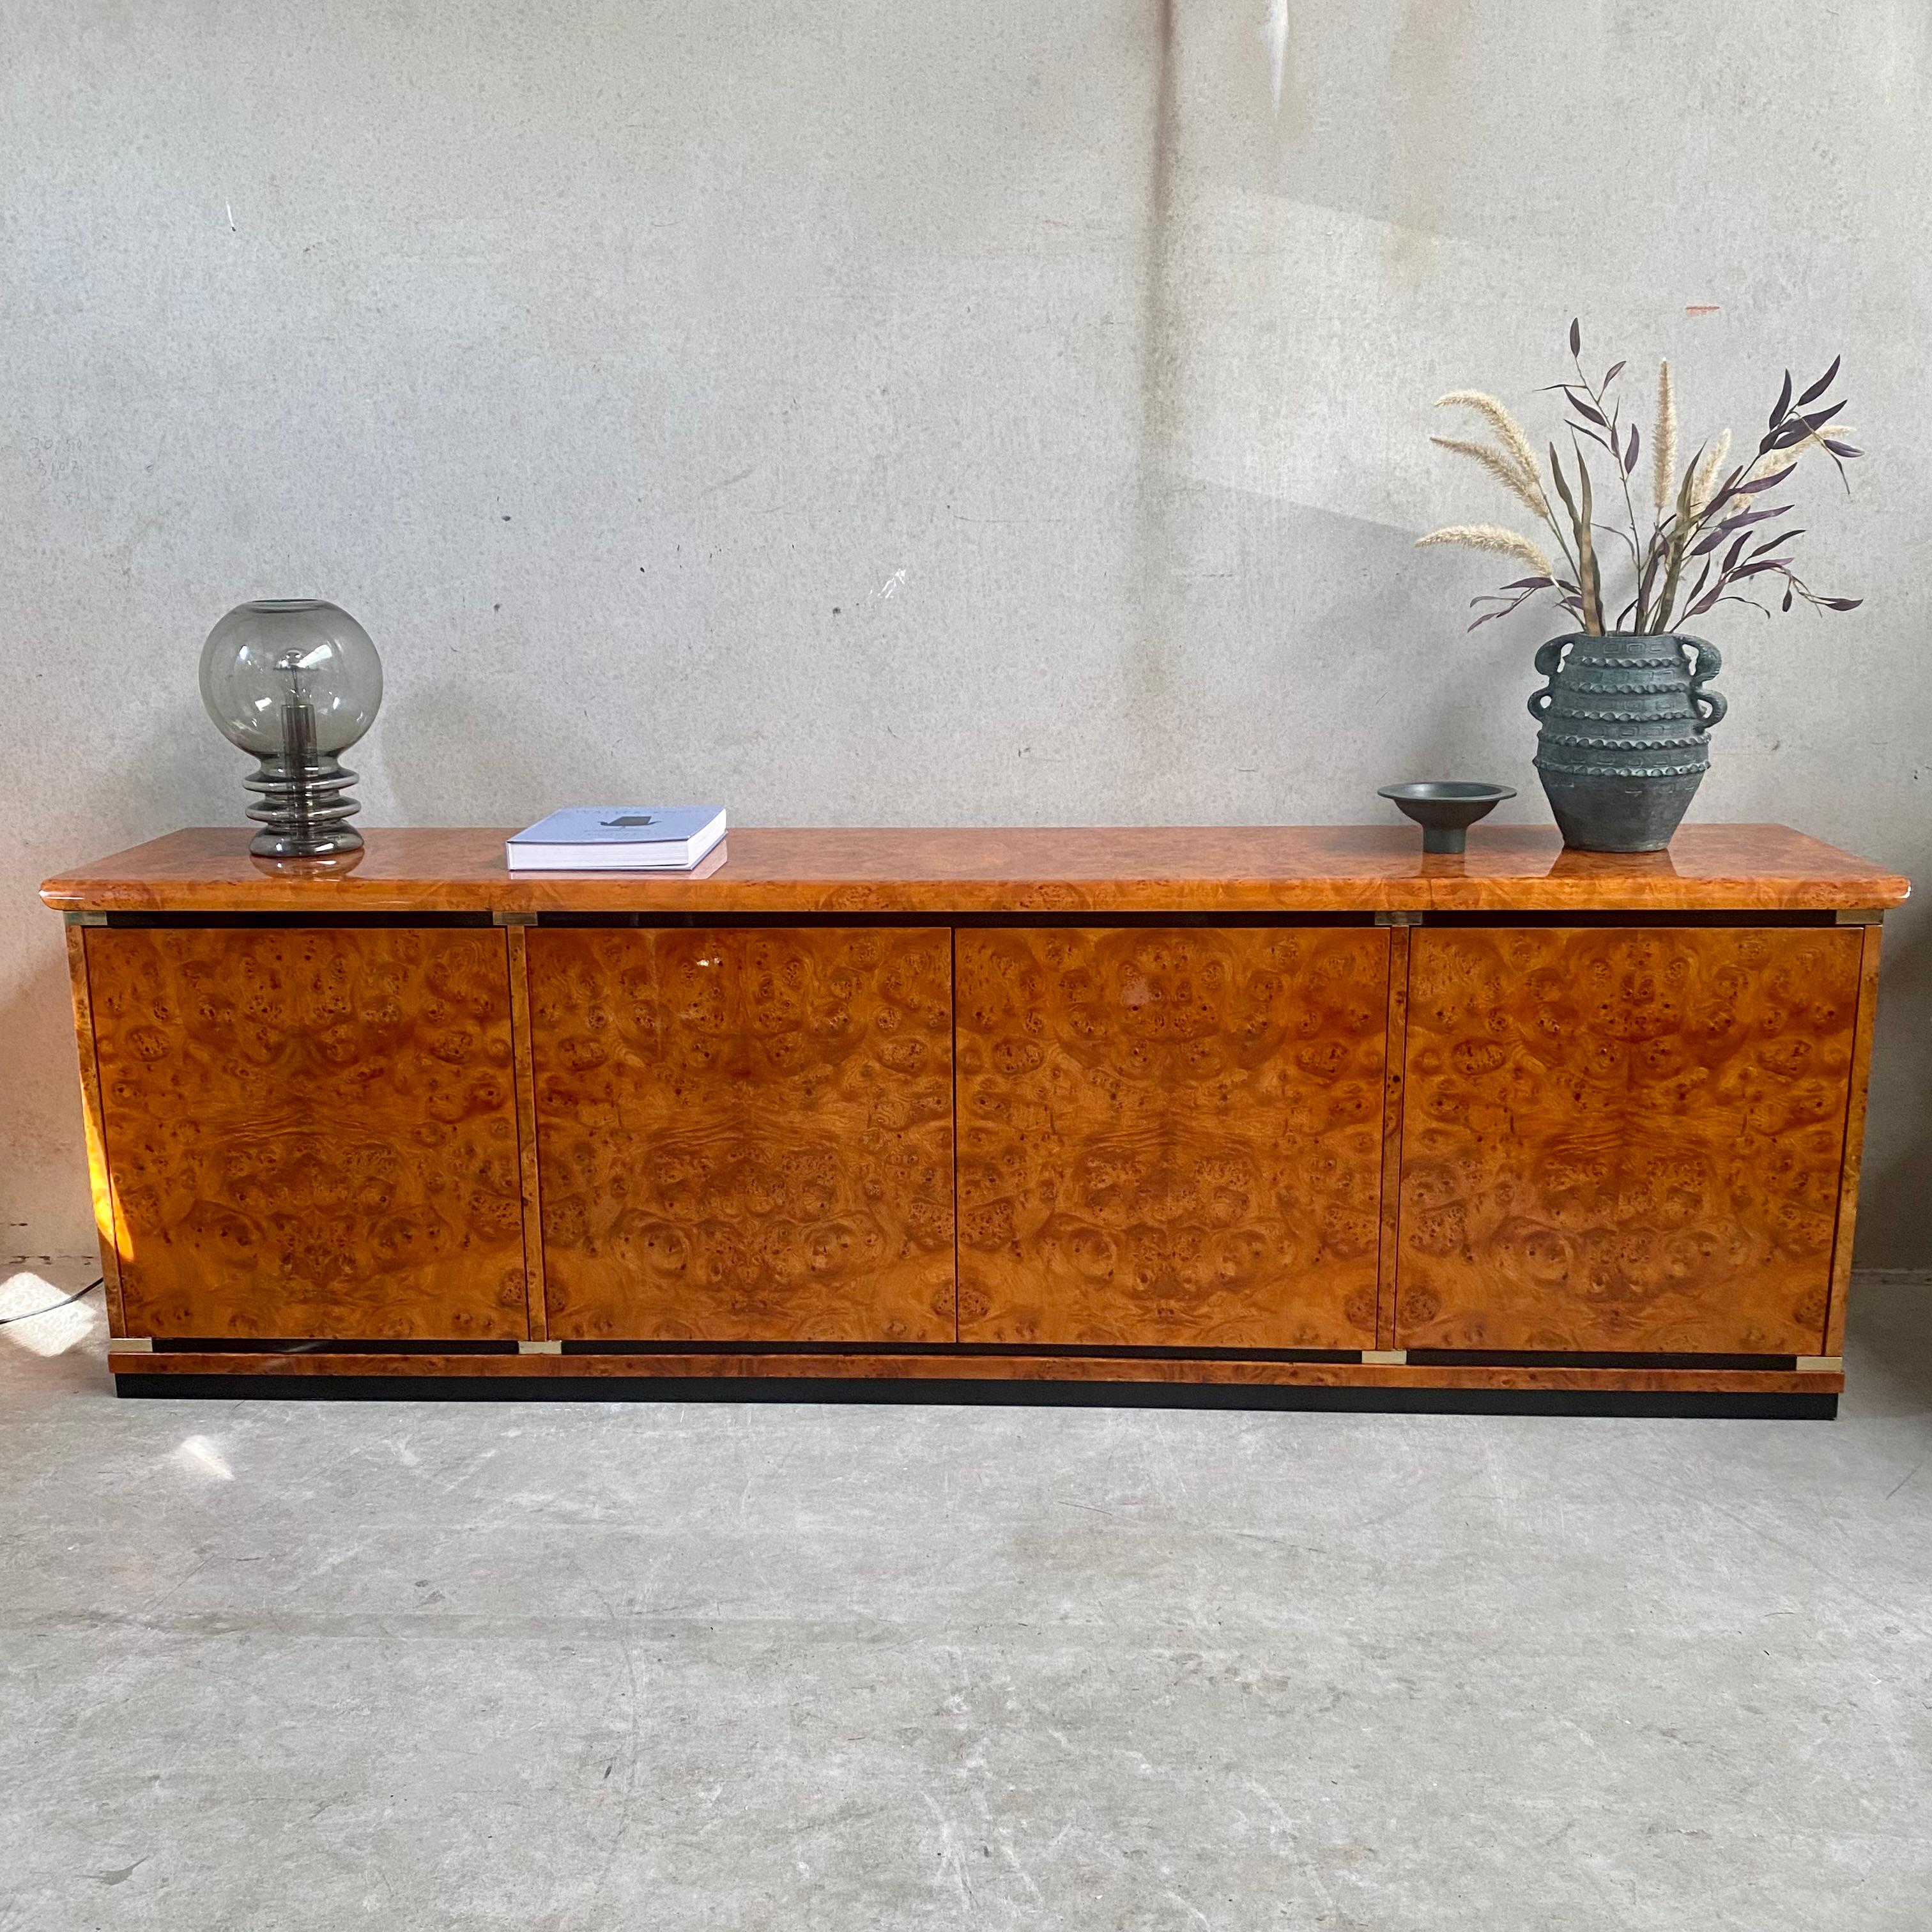 Introducing the Briar Burl Wood Sideboard by Guerini Emilio – a timeless masterpiece meticulously crafted by Gdm Luxury Design Furniture in Italy in 1980. This exquisite sideboard showcases the epitome of luxury and elegance, bringing an